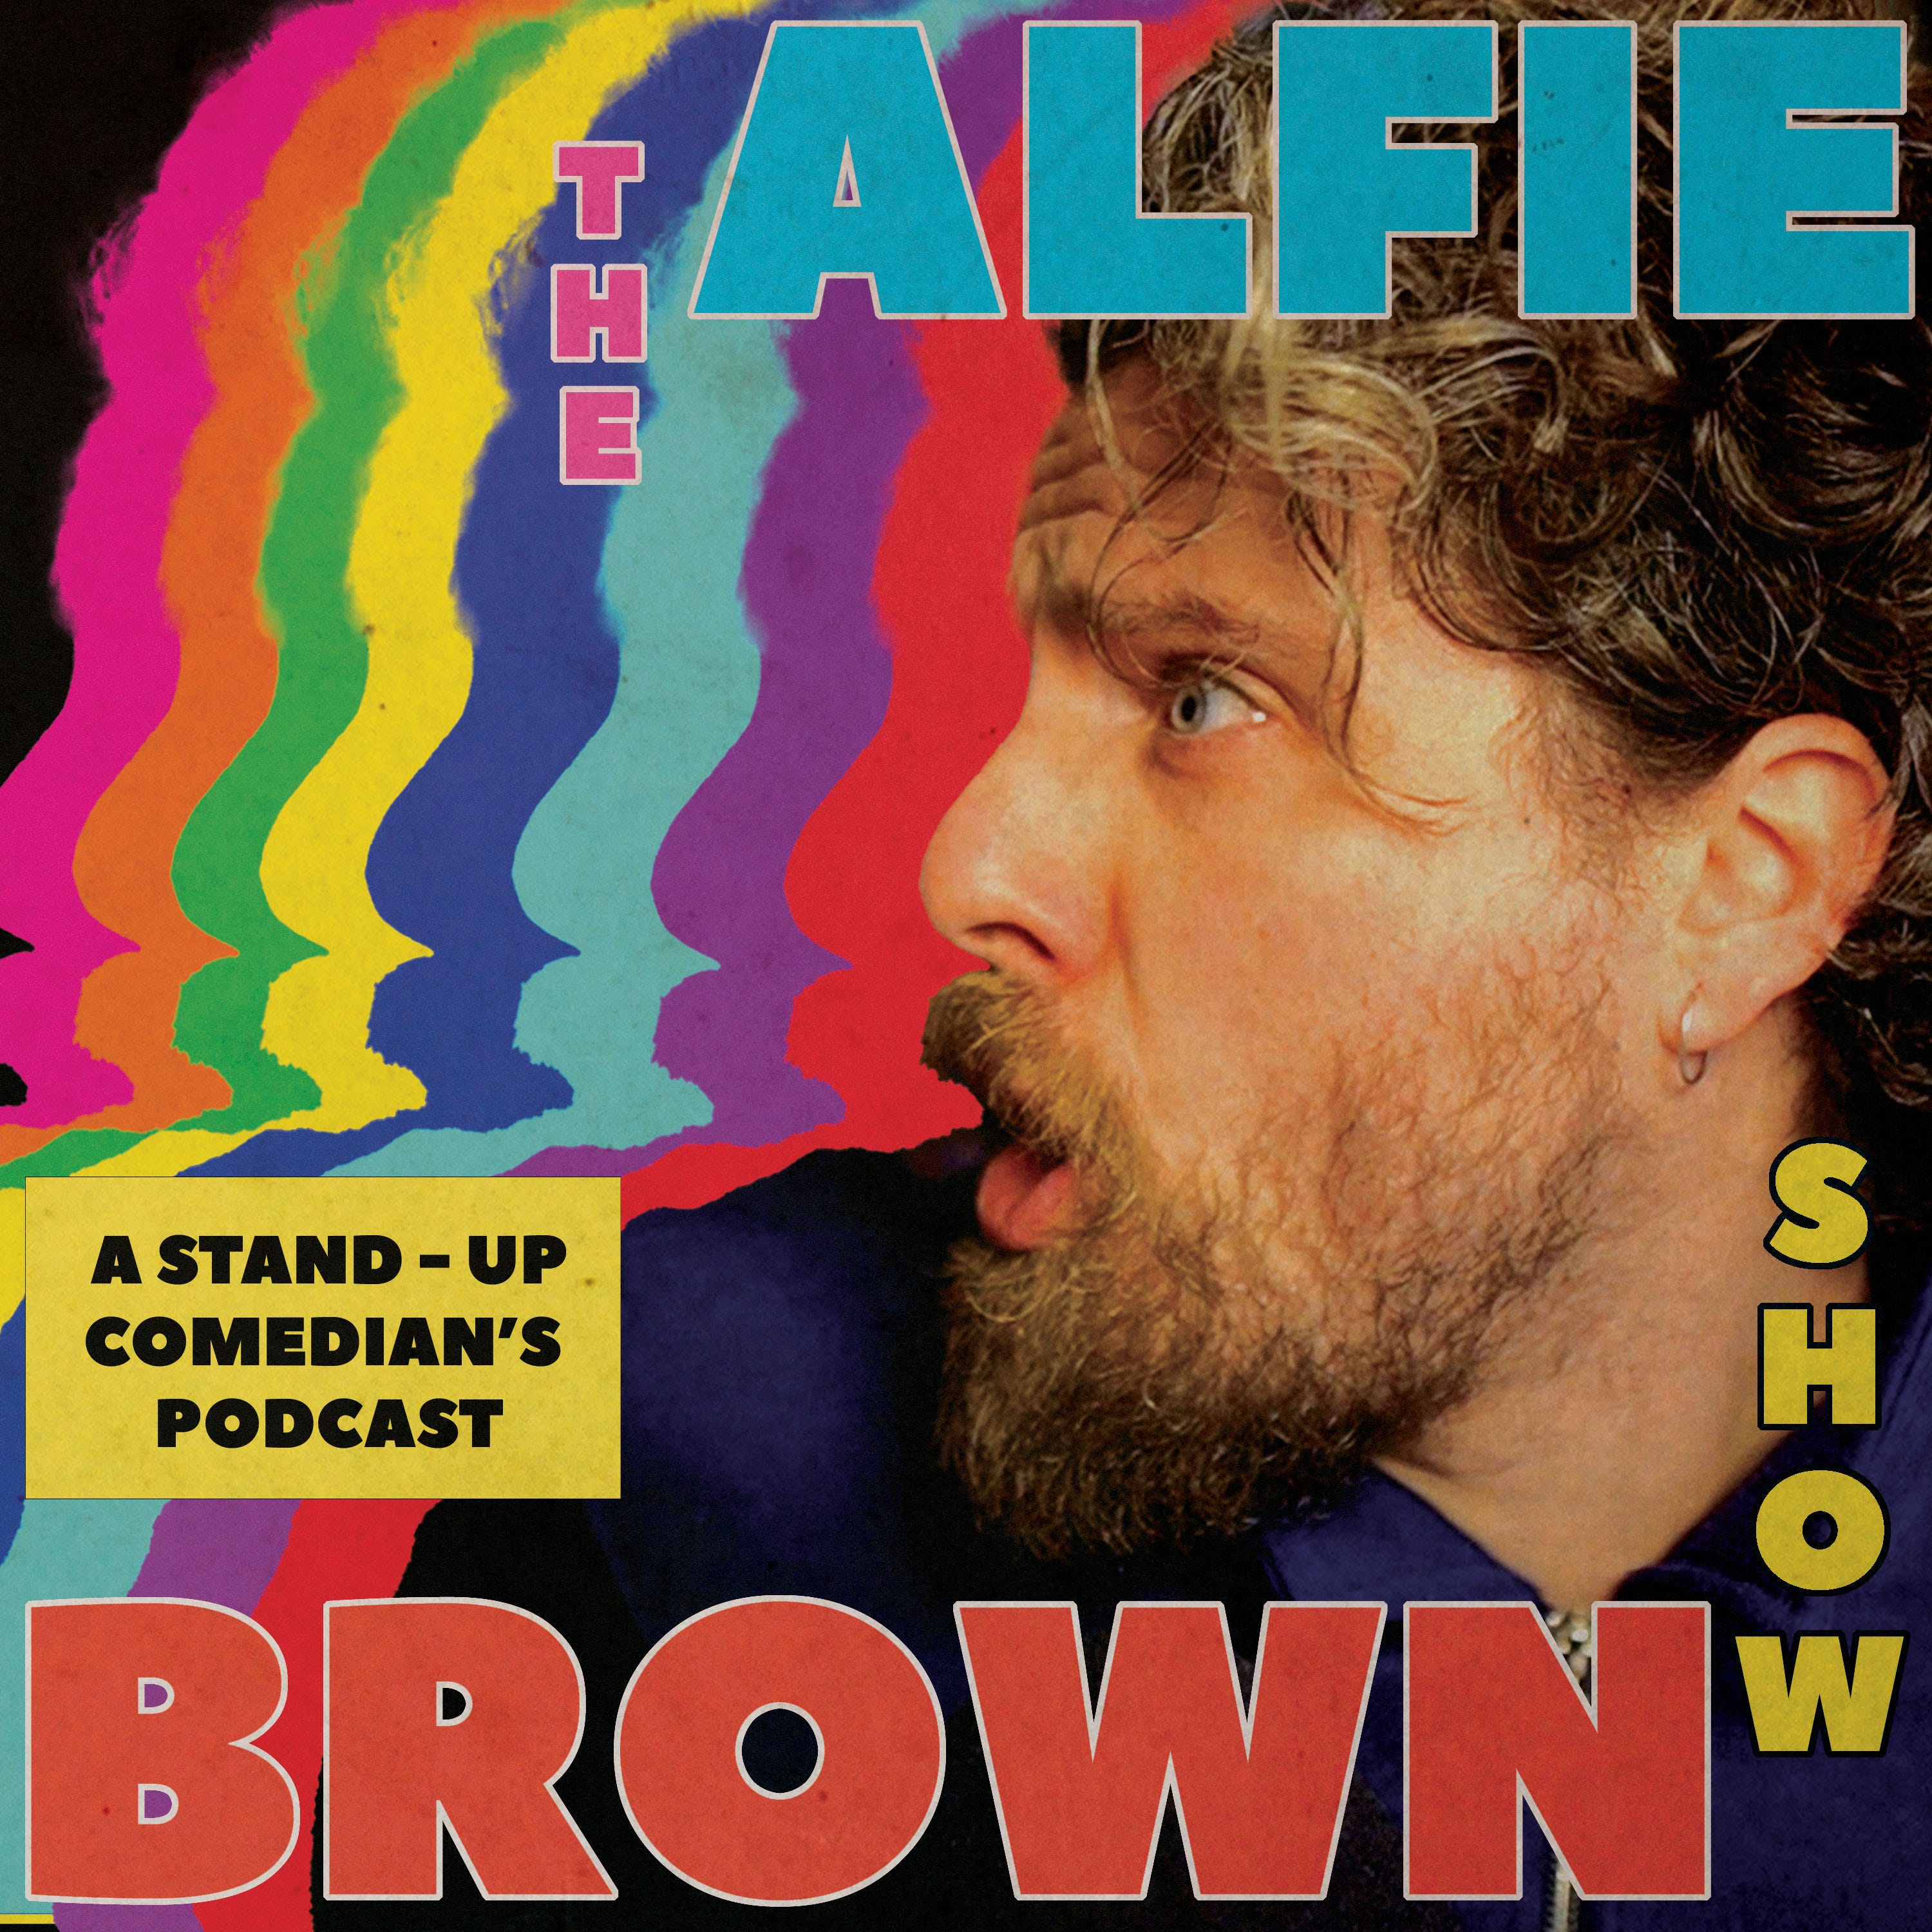 THE CHILDREN’S TV CAROUSEL OF INSANITY - EPISODE 20 - THE ALFIE BROWN SHOW